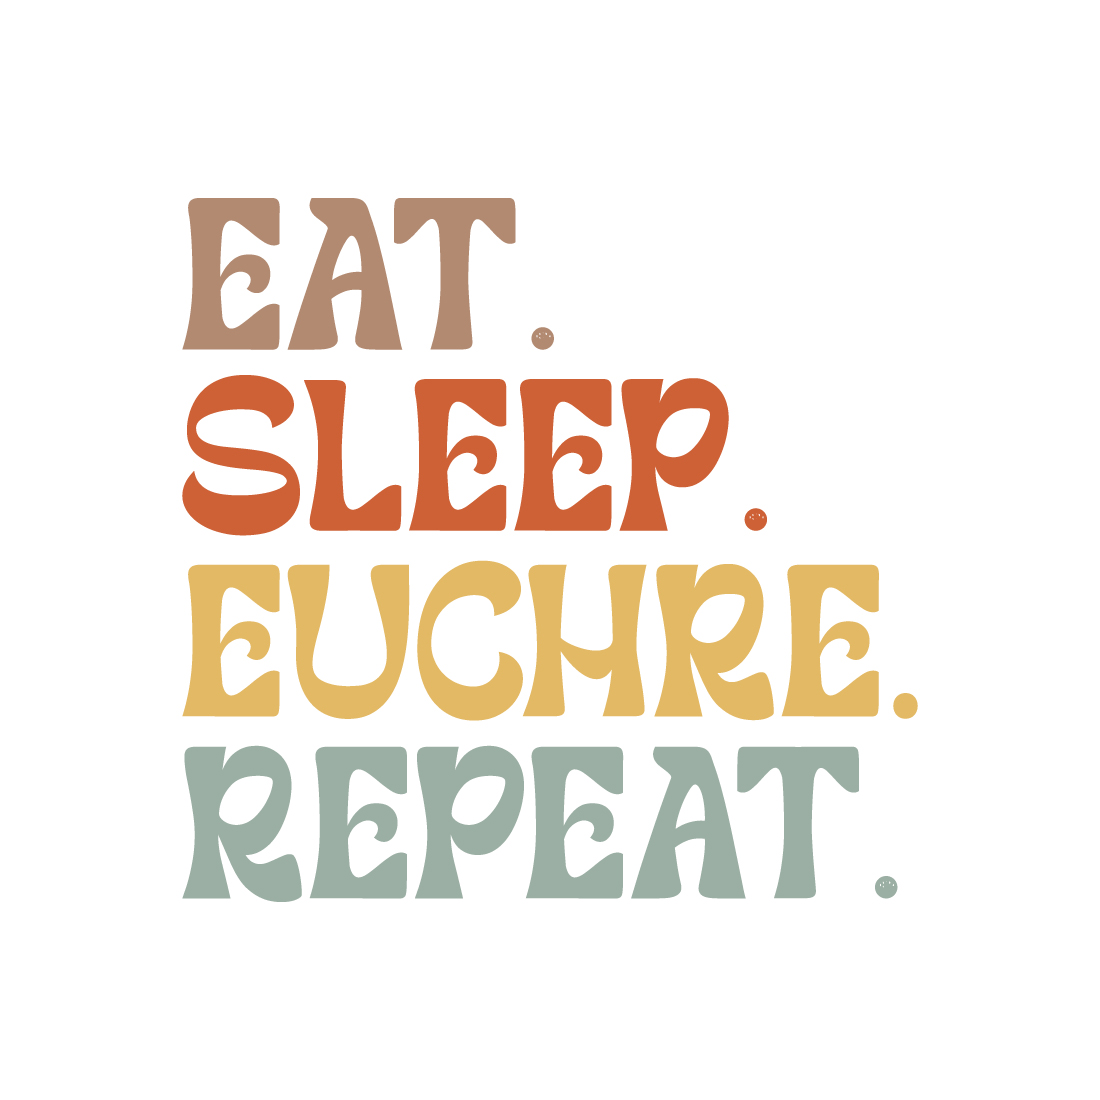 Eat Sleep Euchre Repeat indoor game typography design for t-shirts, cards, frame artwork, phone cases, bags, mugs, stickers, tumblers, print, etc cover image.